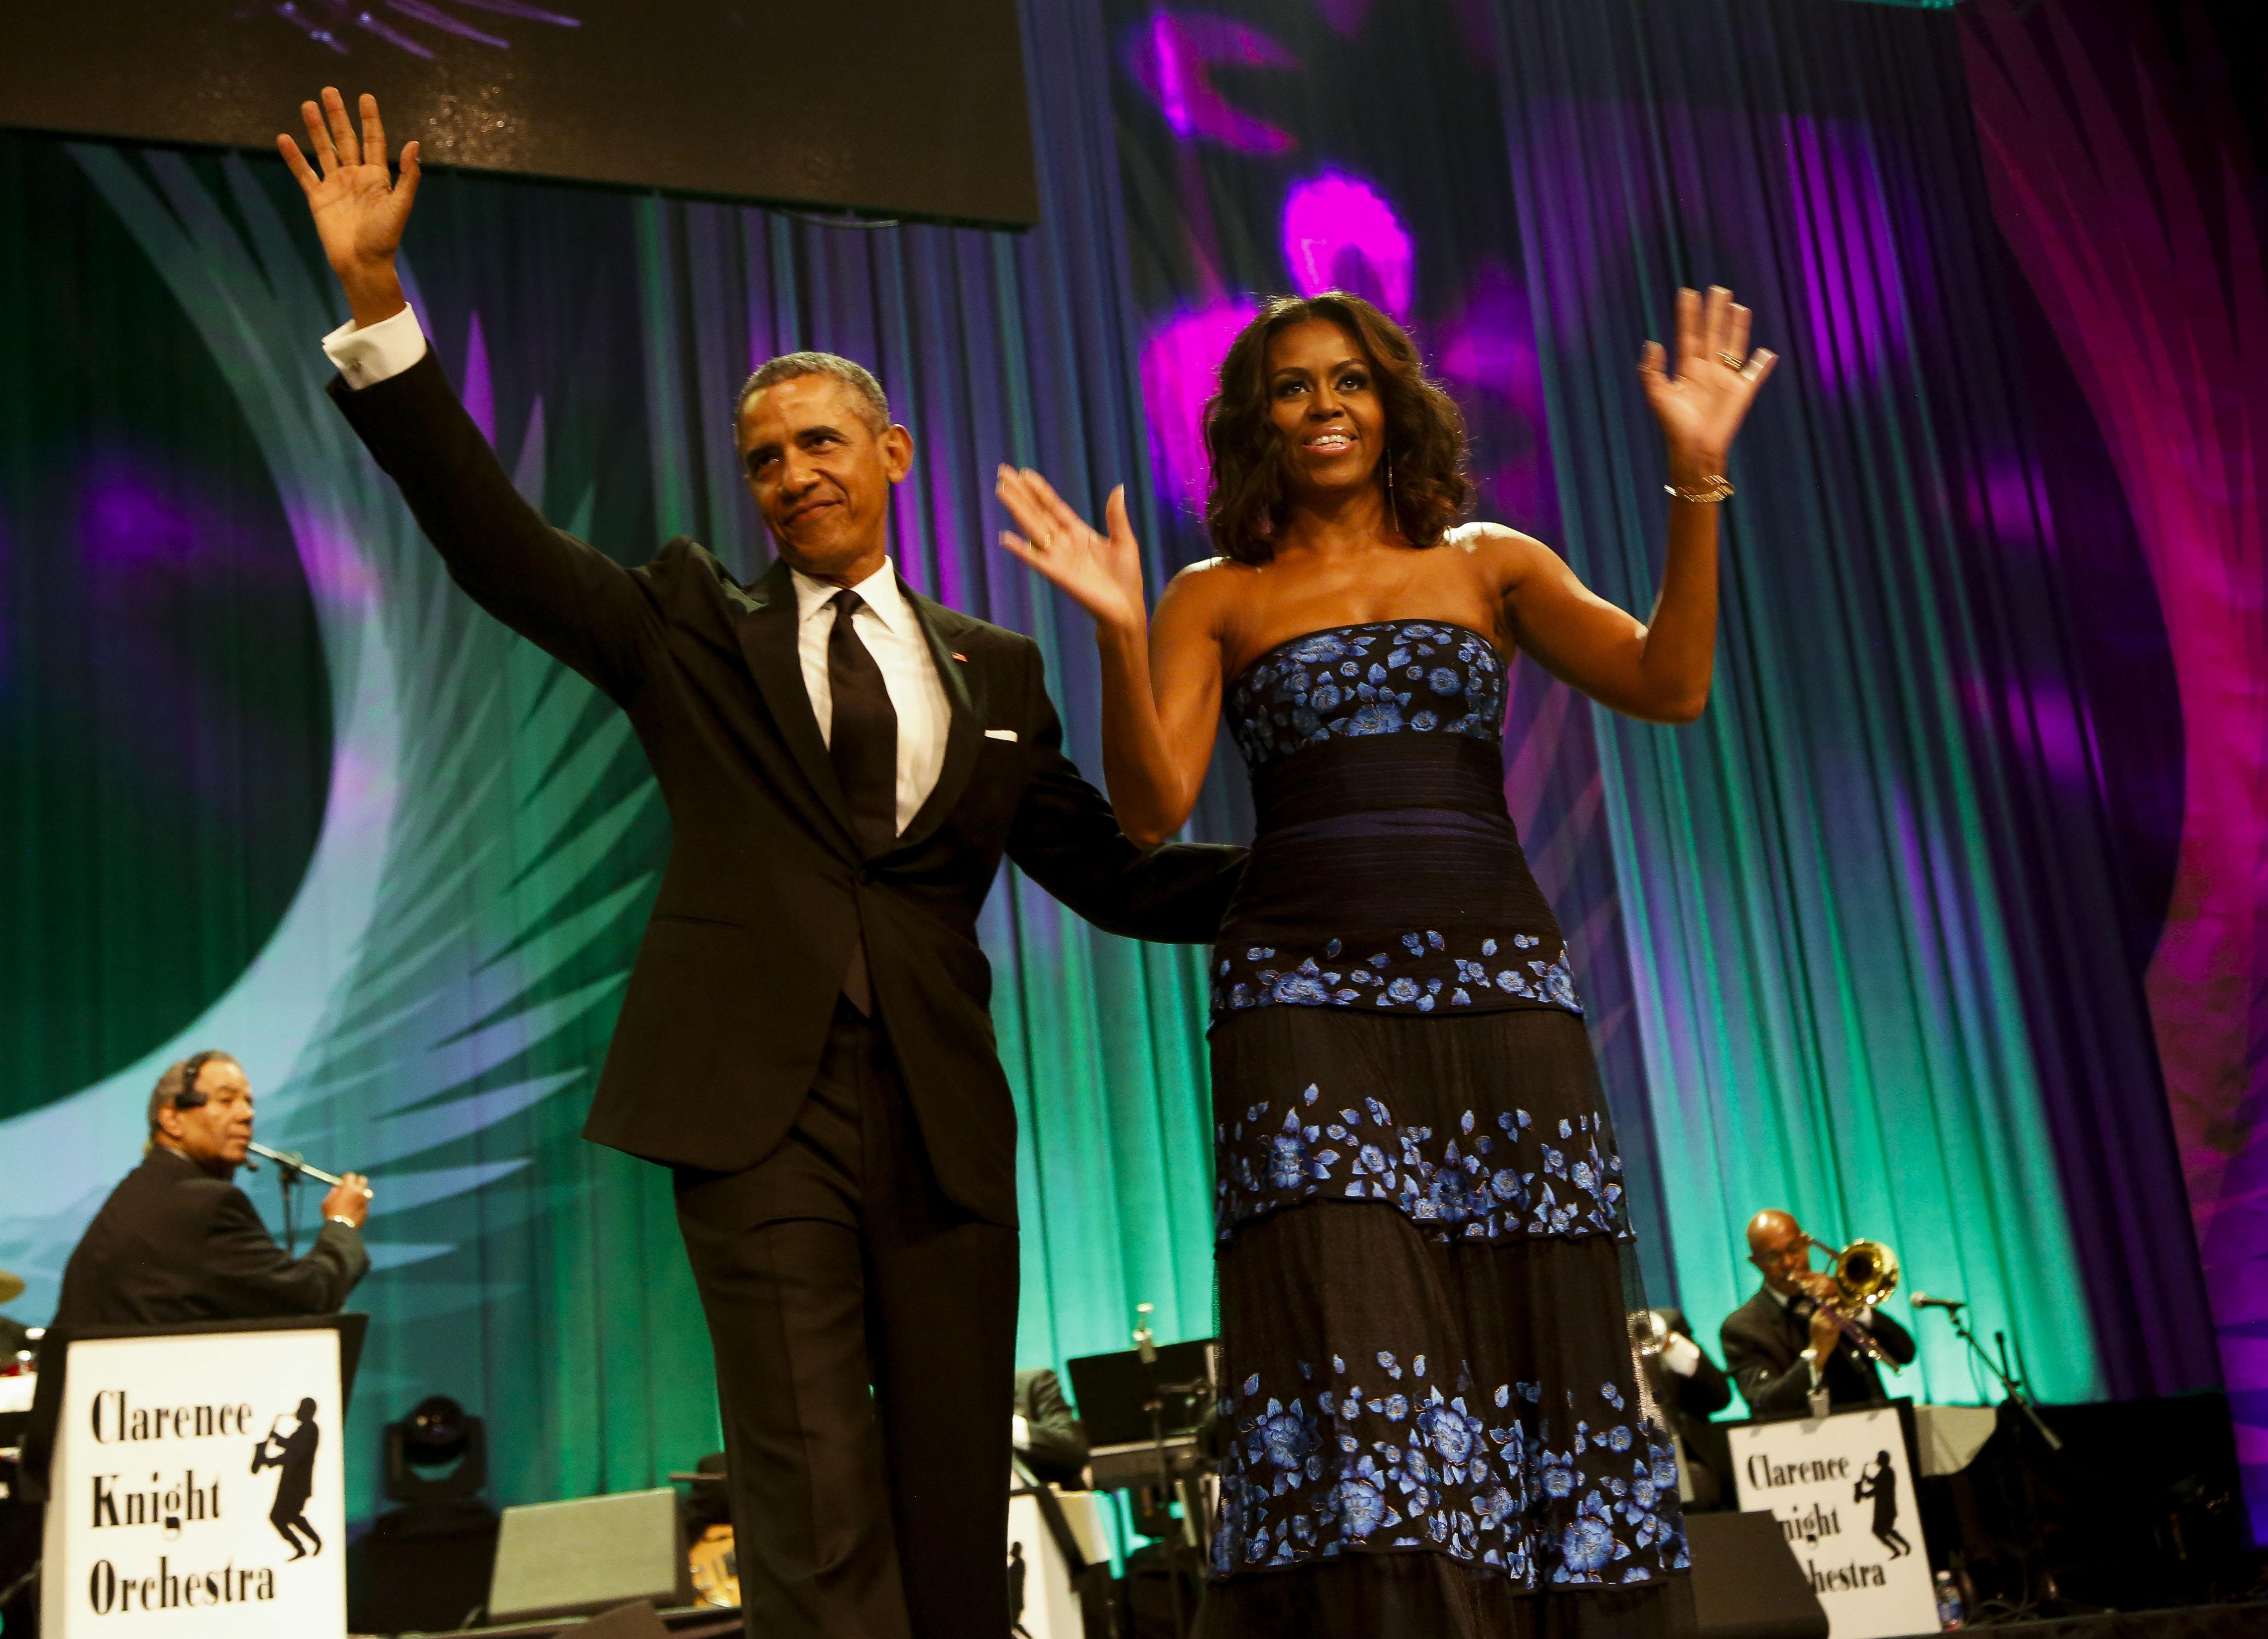 US President Barack Obama and First Lady Michelle Obama arrive on stage before President Obama delivers remarks at the Congressional Black Caucus Foundation?s 45th Annual Legislative Conference Phoenix Awards Dinner at the Walter E. Washington Convention Center, on September 19, 2015 in Washington, DC, USA. Photo by Aude Guerrucci/Pool/ABACAPRESS.COM Reporters / Abaca